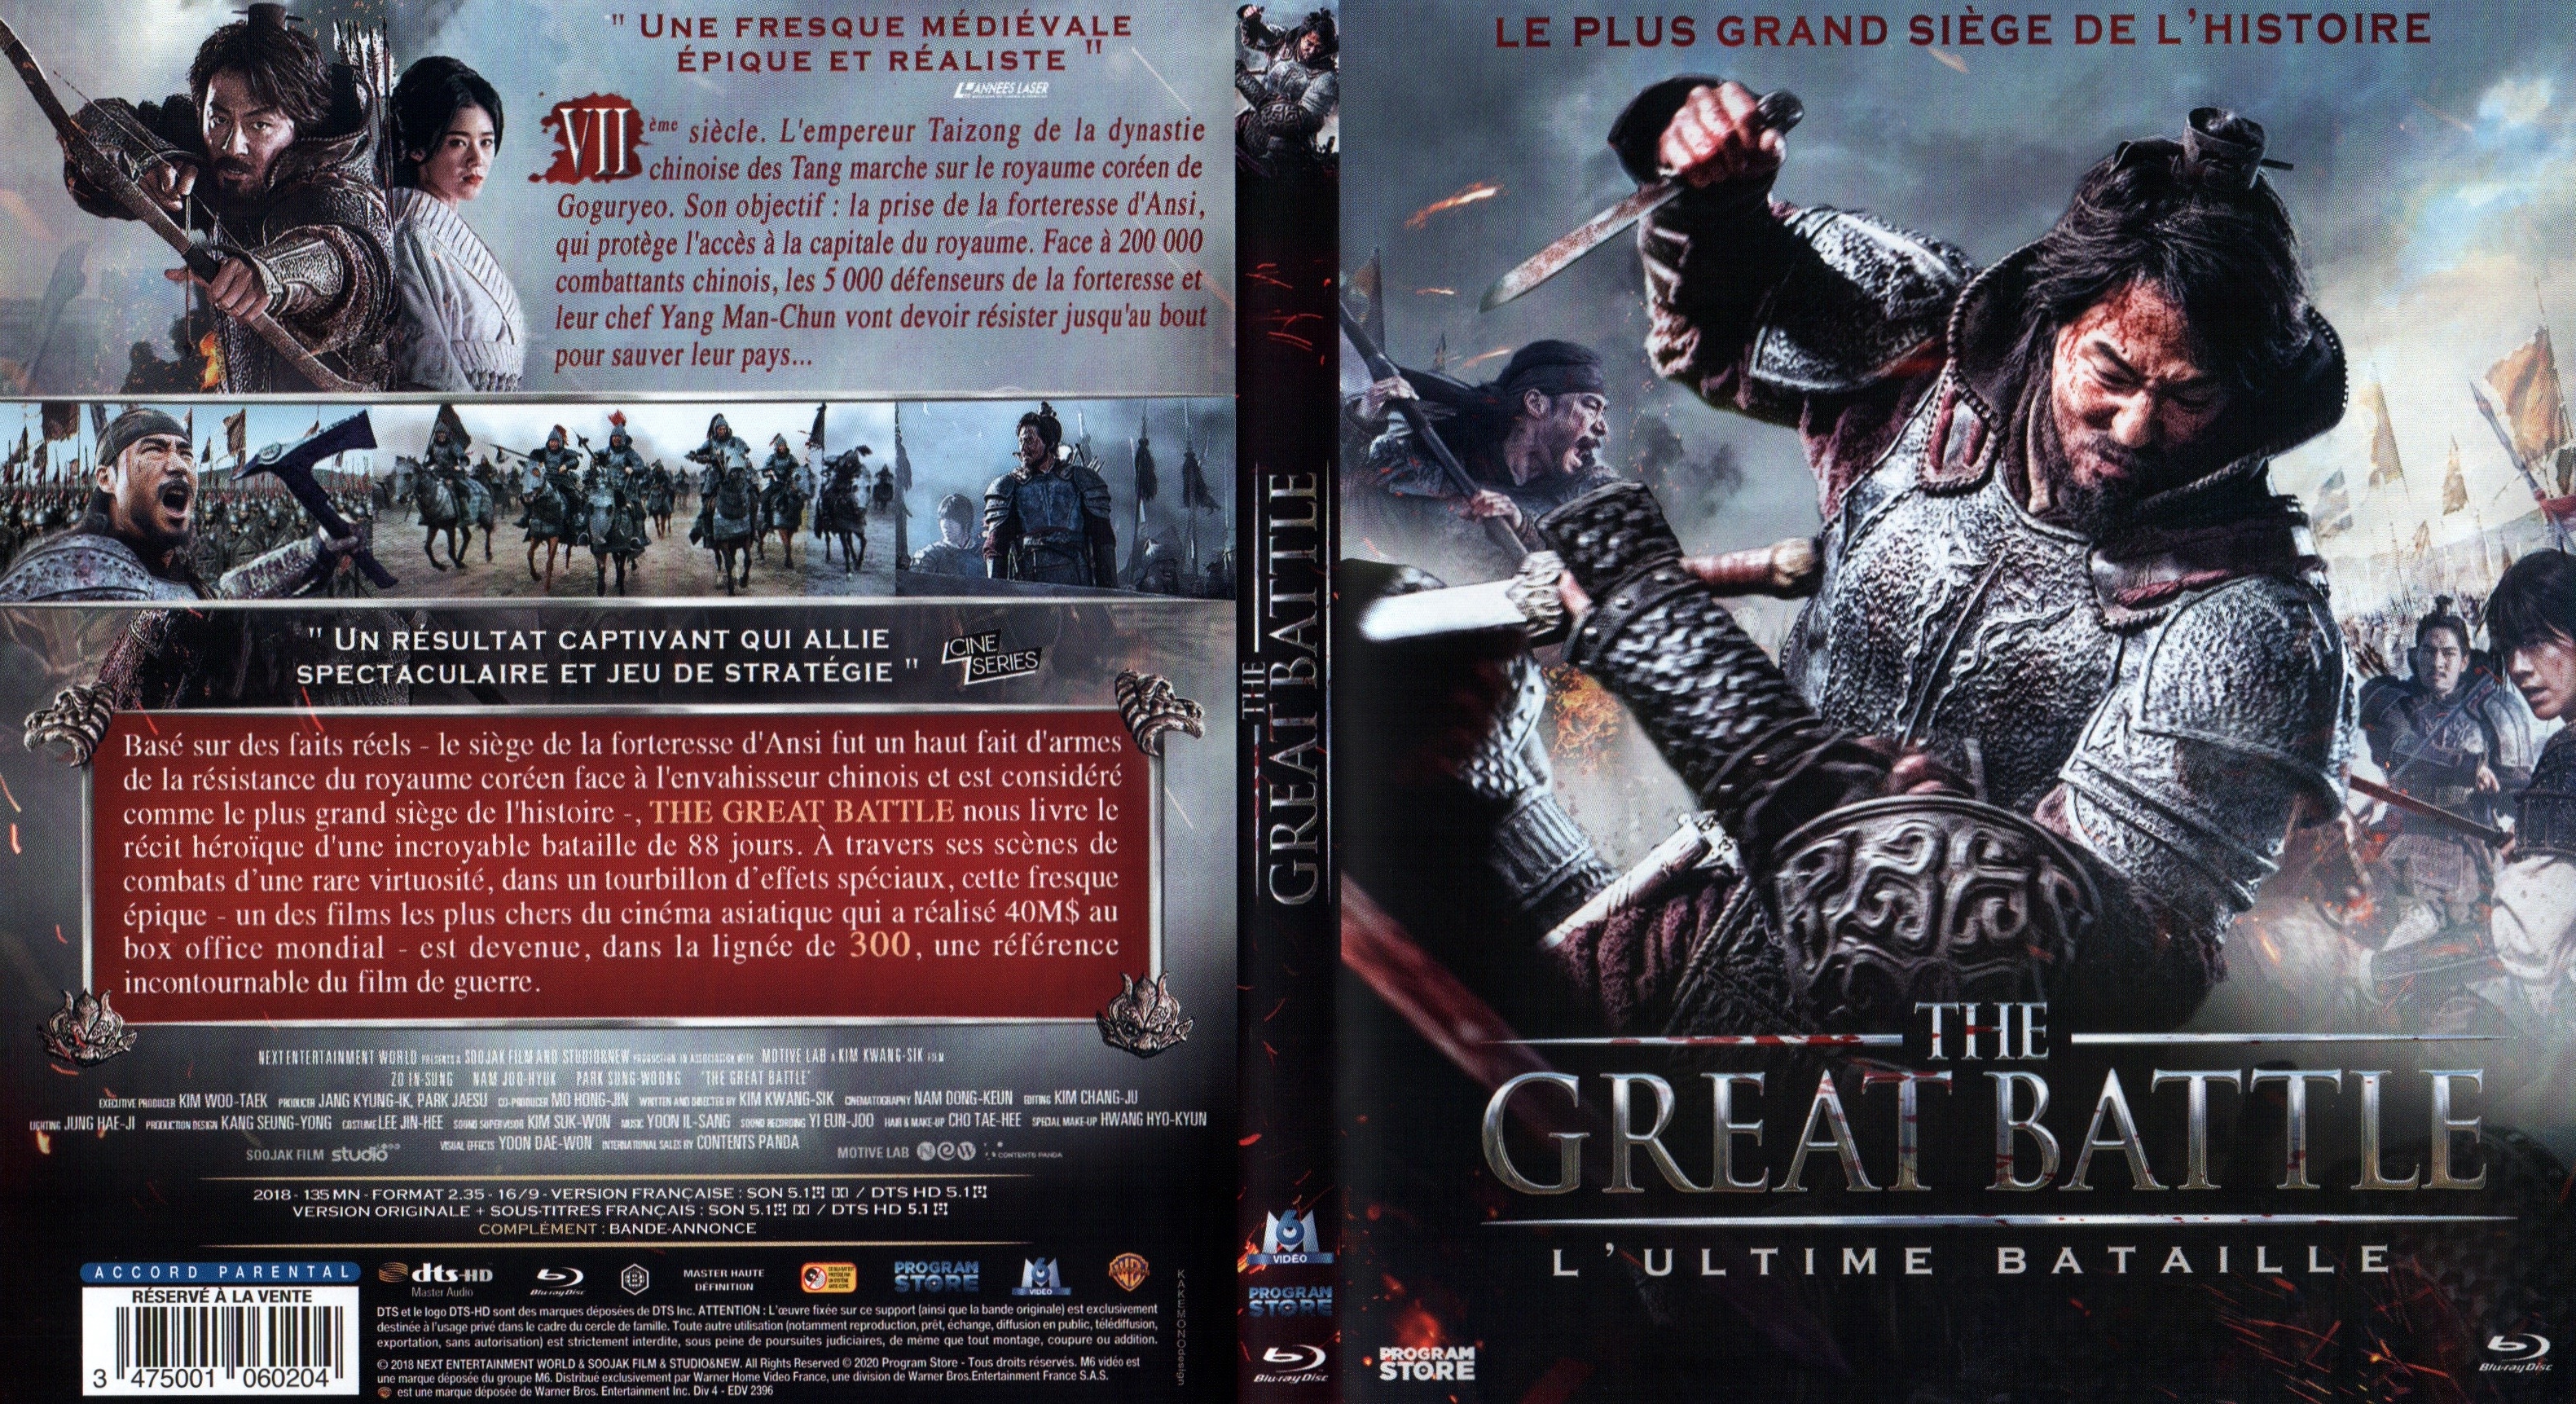 Jaquette DVD The great battle (BLU-RAY)